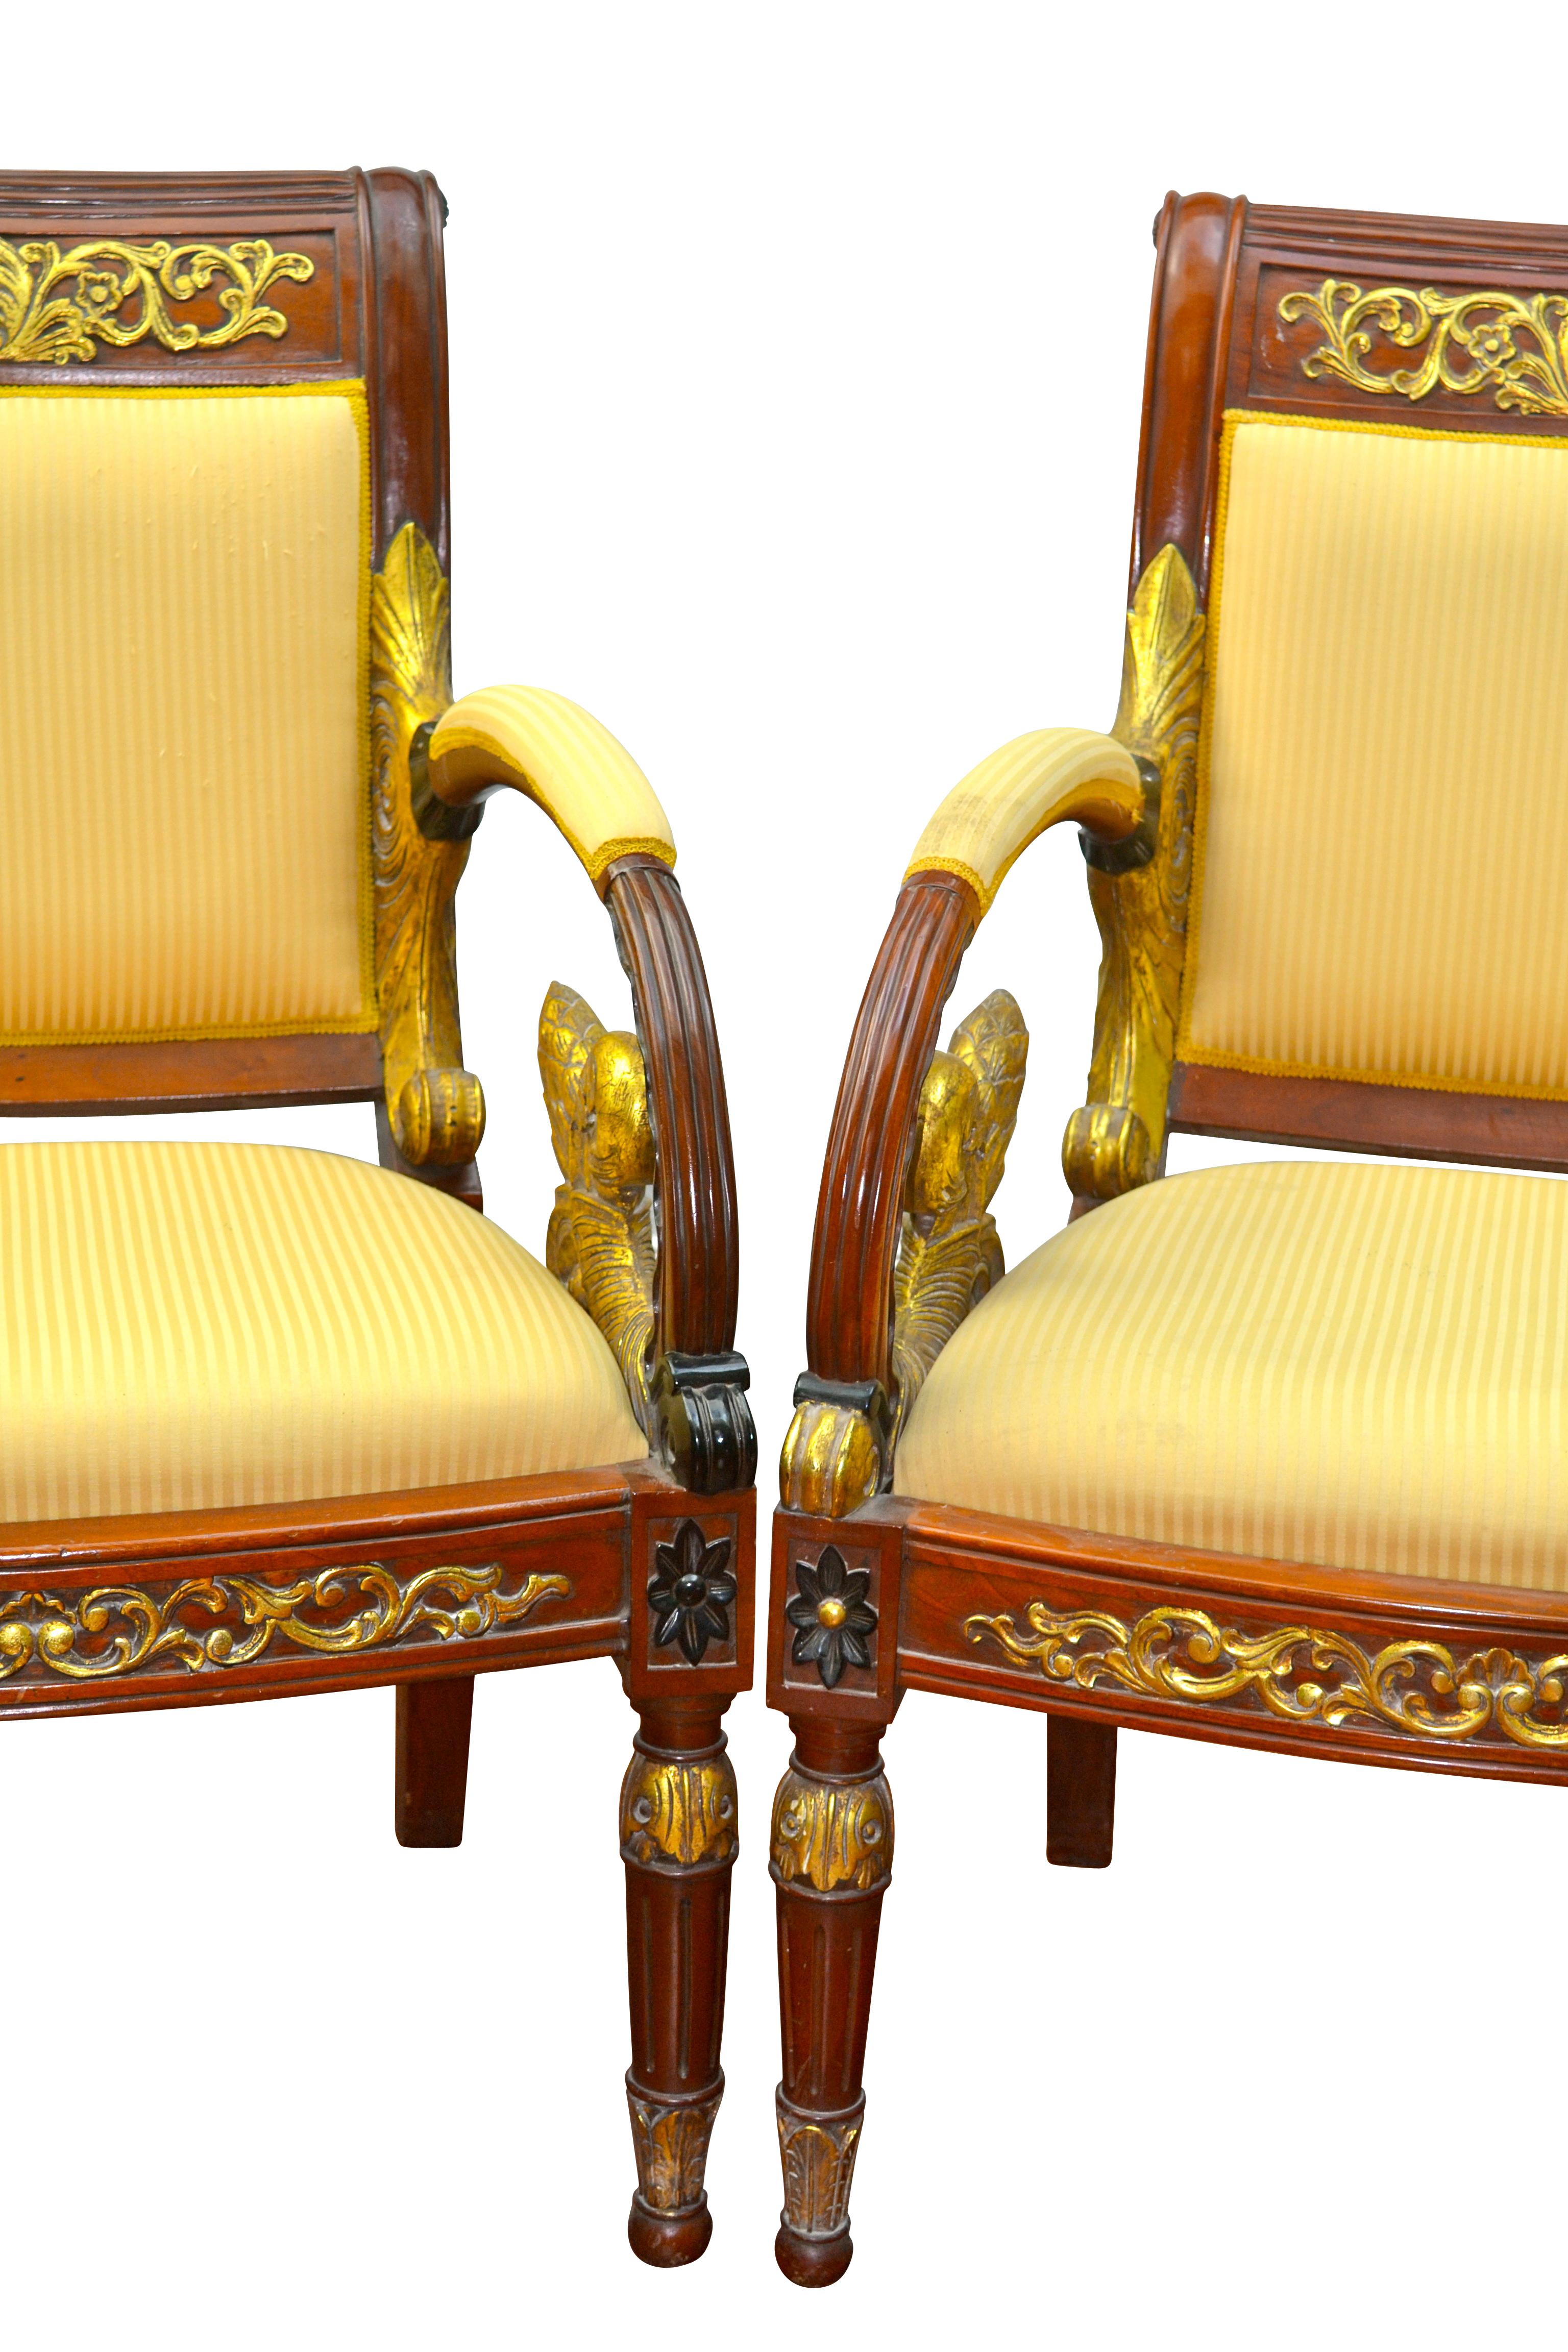 Pair of Gianni Versace Armchairs from the Vanitas 1994 Collection In Good Condition For Sale In Vancouver, British Columbia